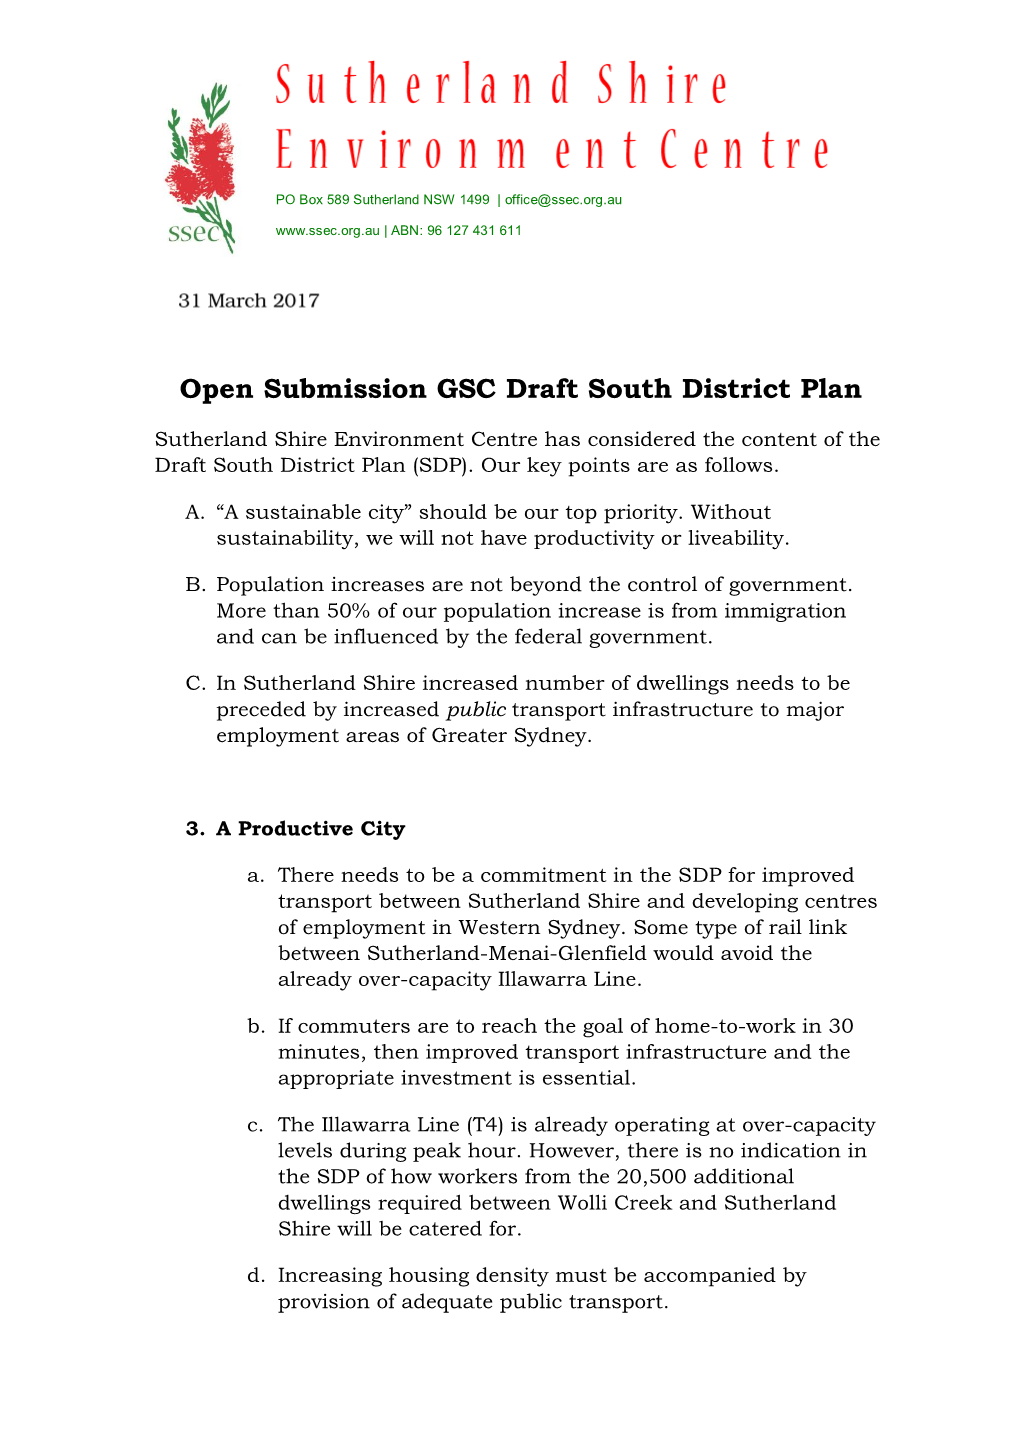 Submission GSC Draft South District Plan